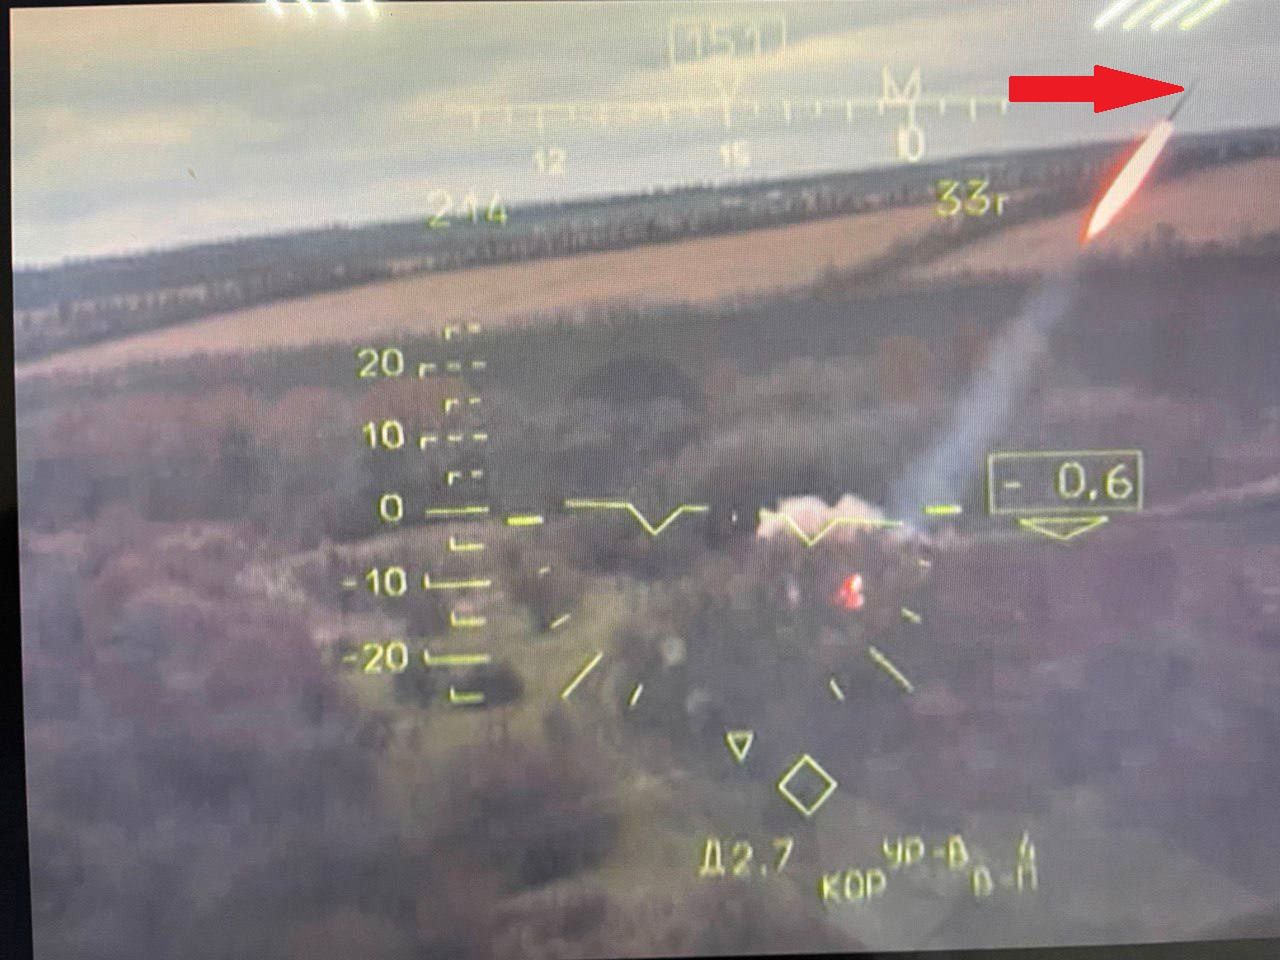 Ka-52 helicopter downed by own artillery exposes Russian chaos